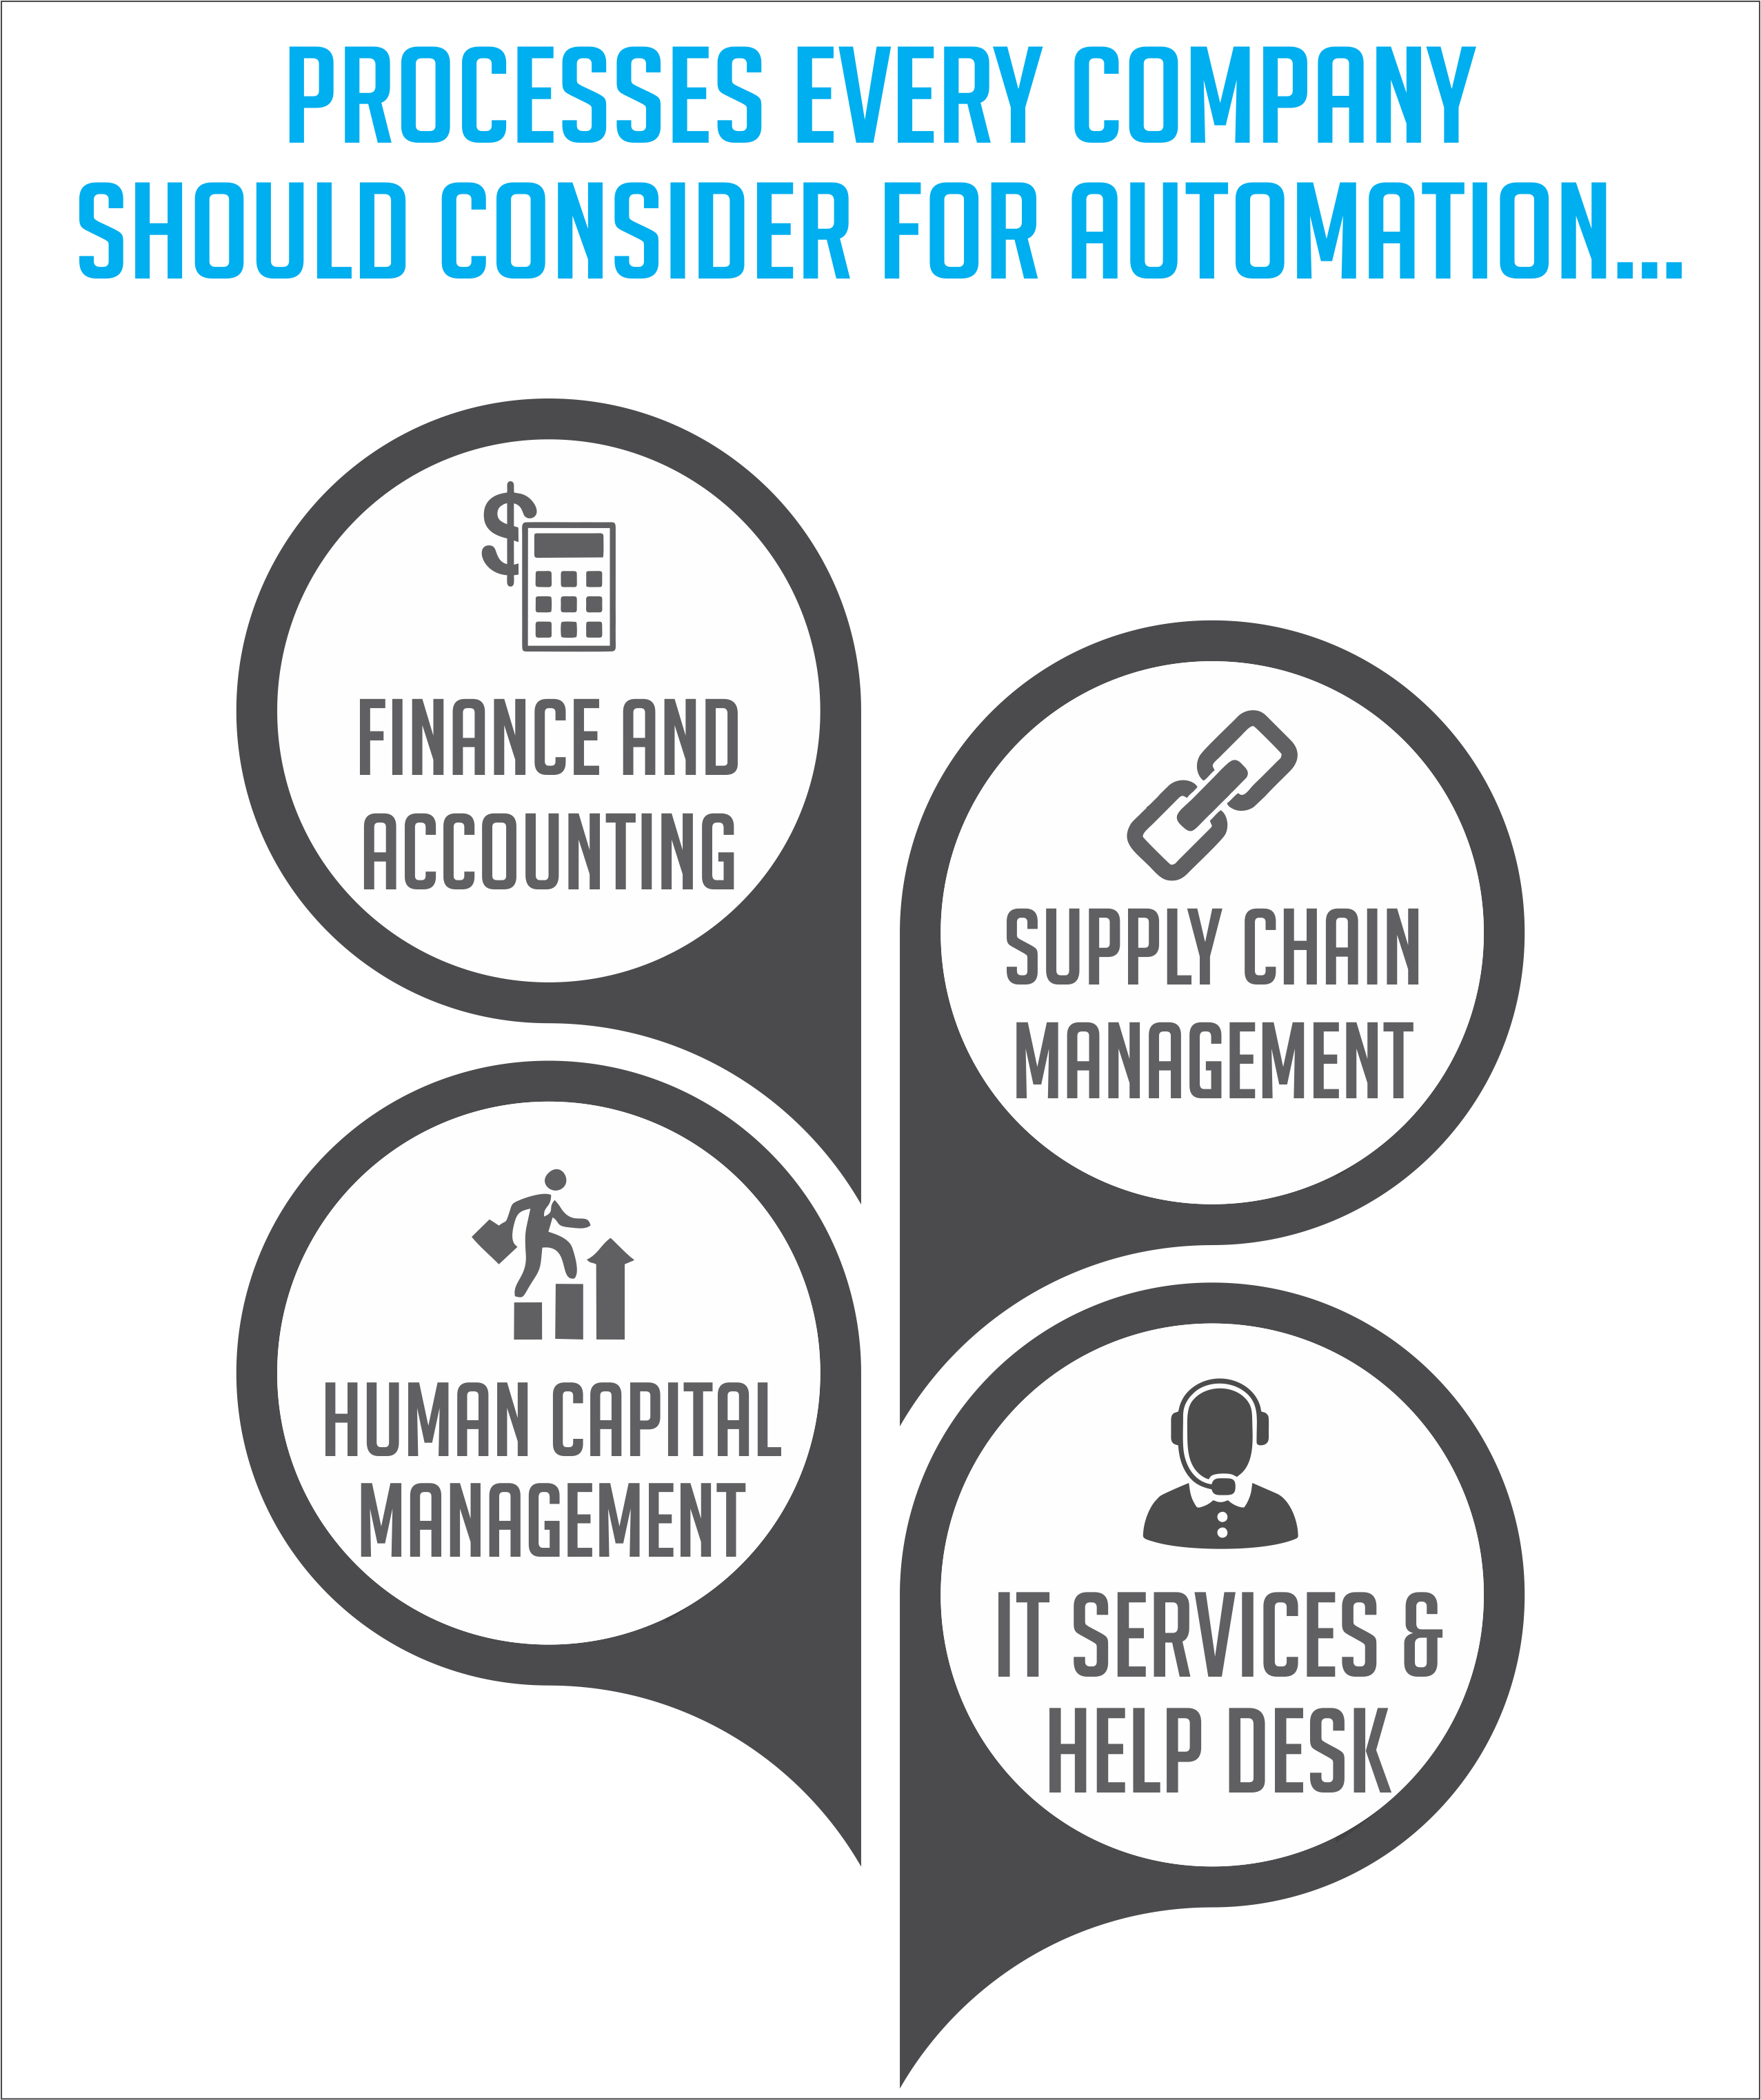 Processes every company should consider for Automation